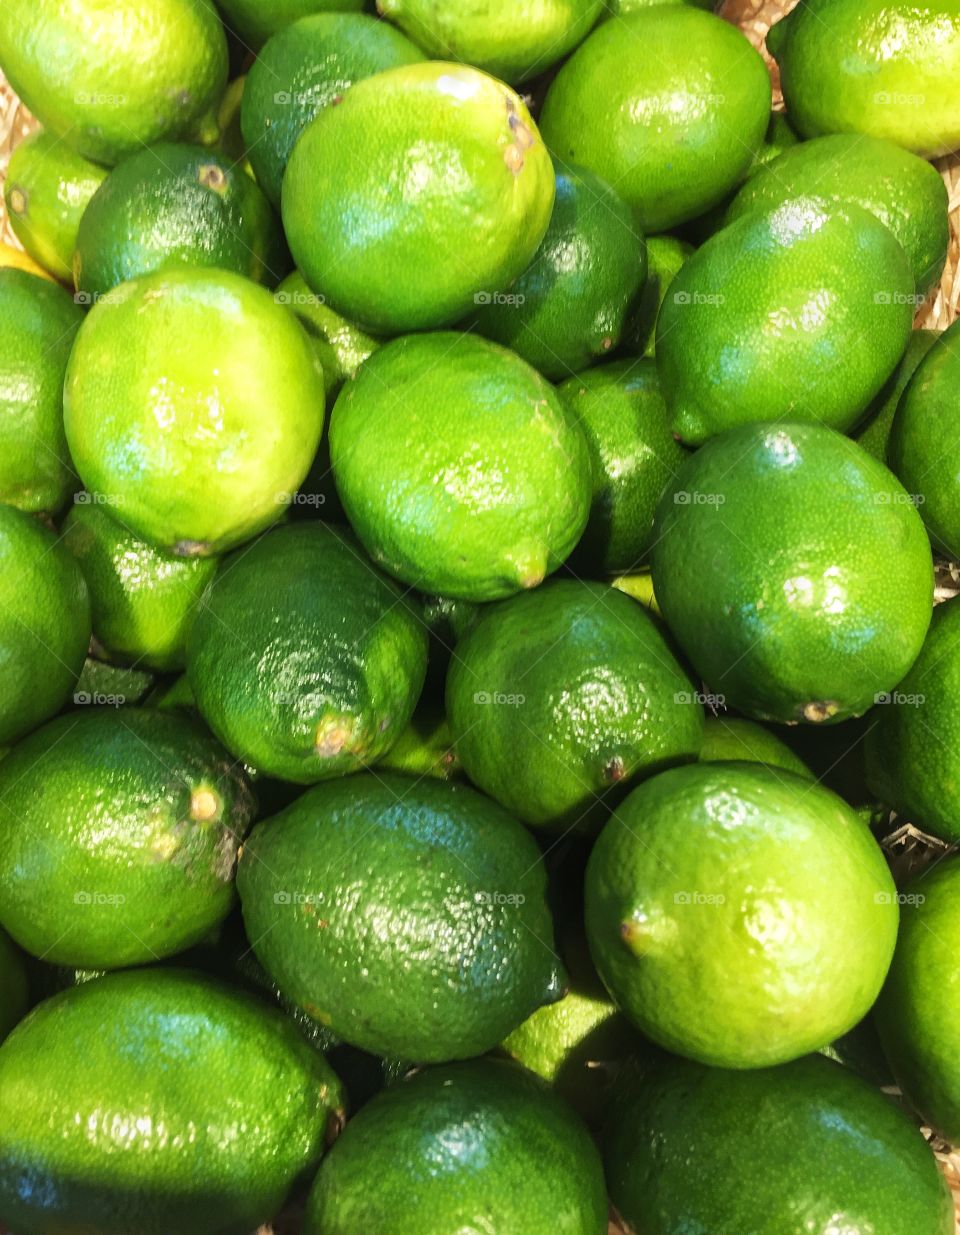 A full frame background of fresh, organic green limes on a market stall